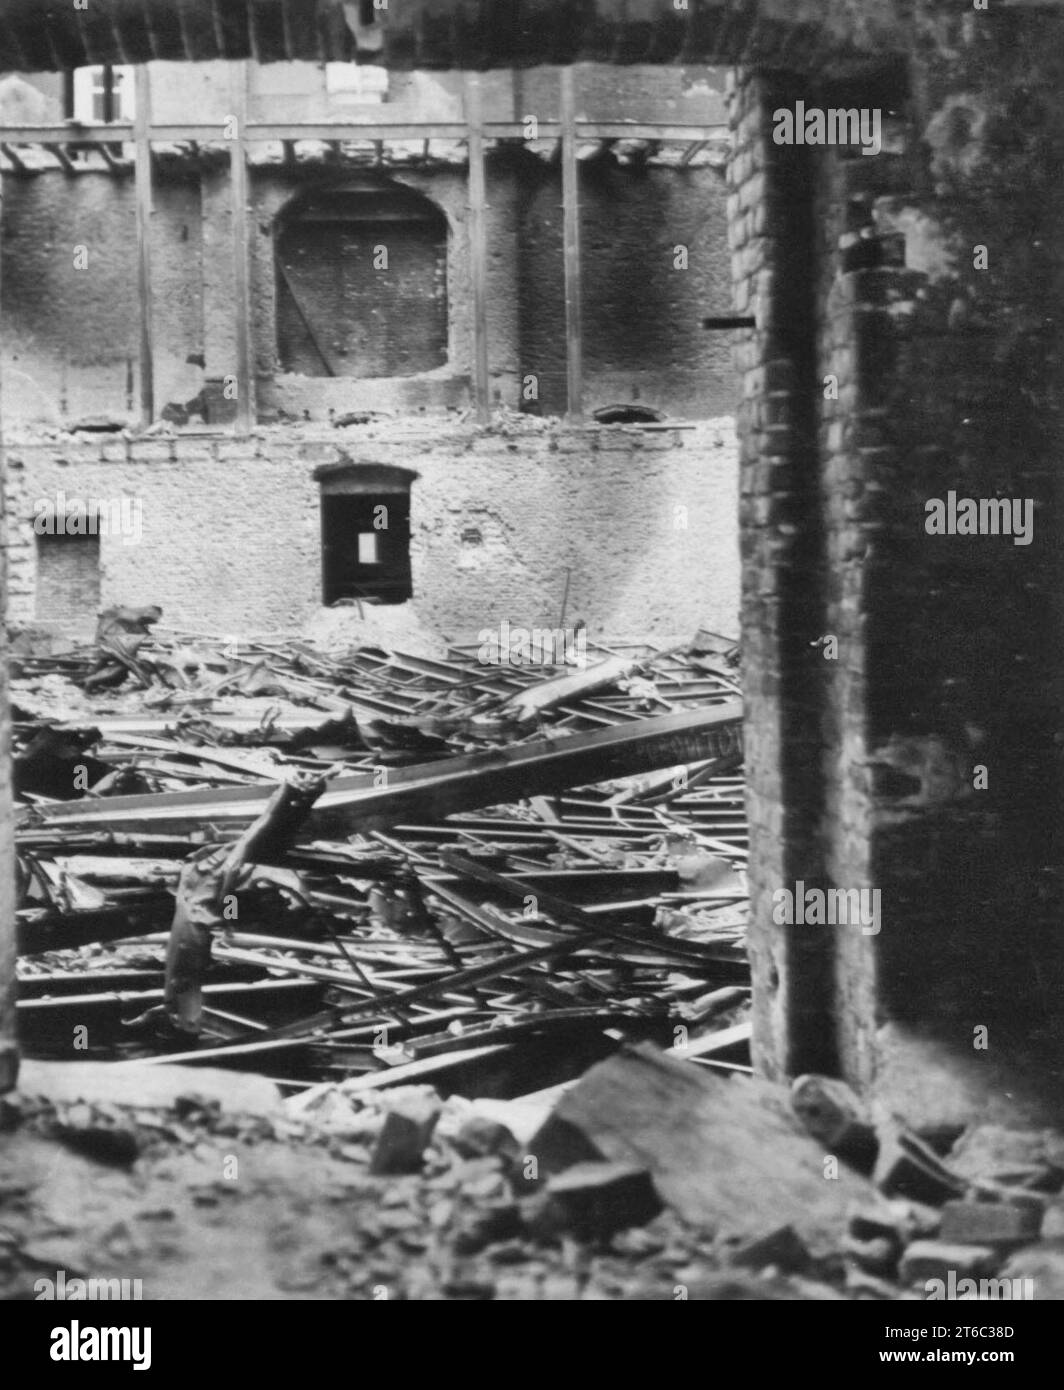 View Of The Main Room In Reichstag Building, Berlin, After Aaf Bombing Blitz, 1945 Stock Photo